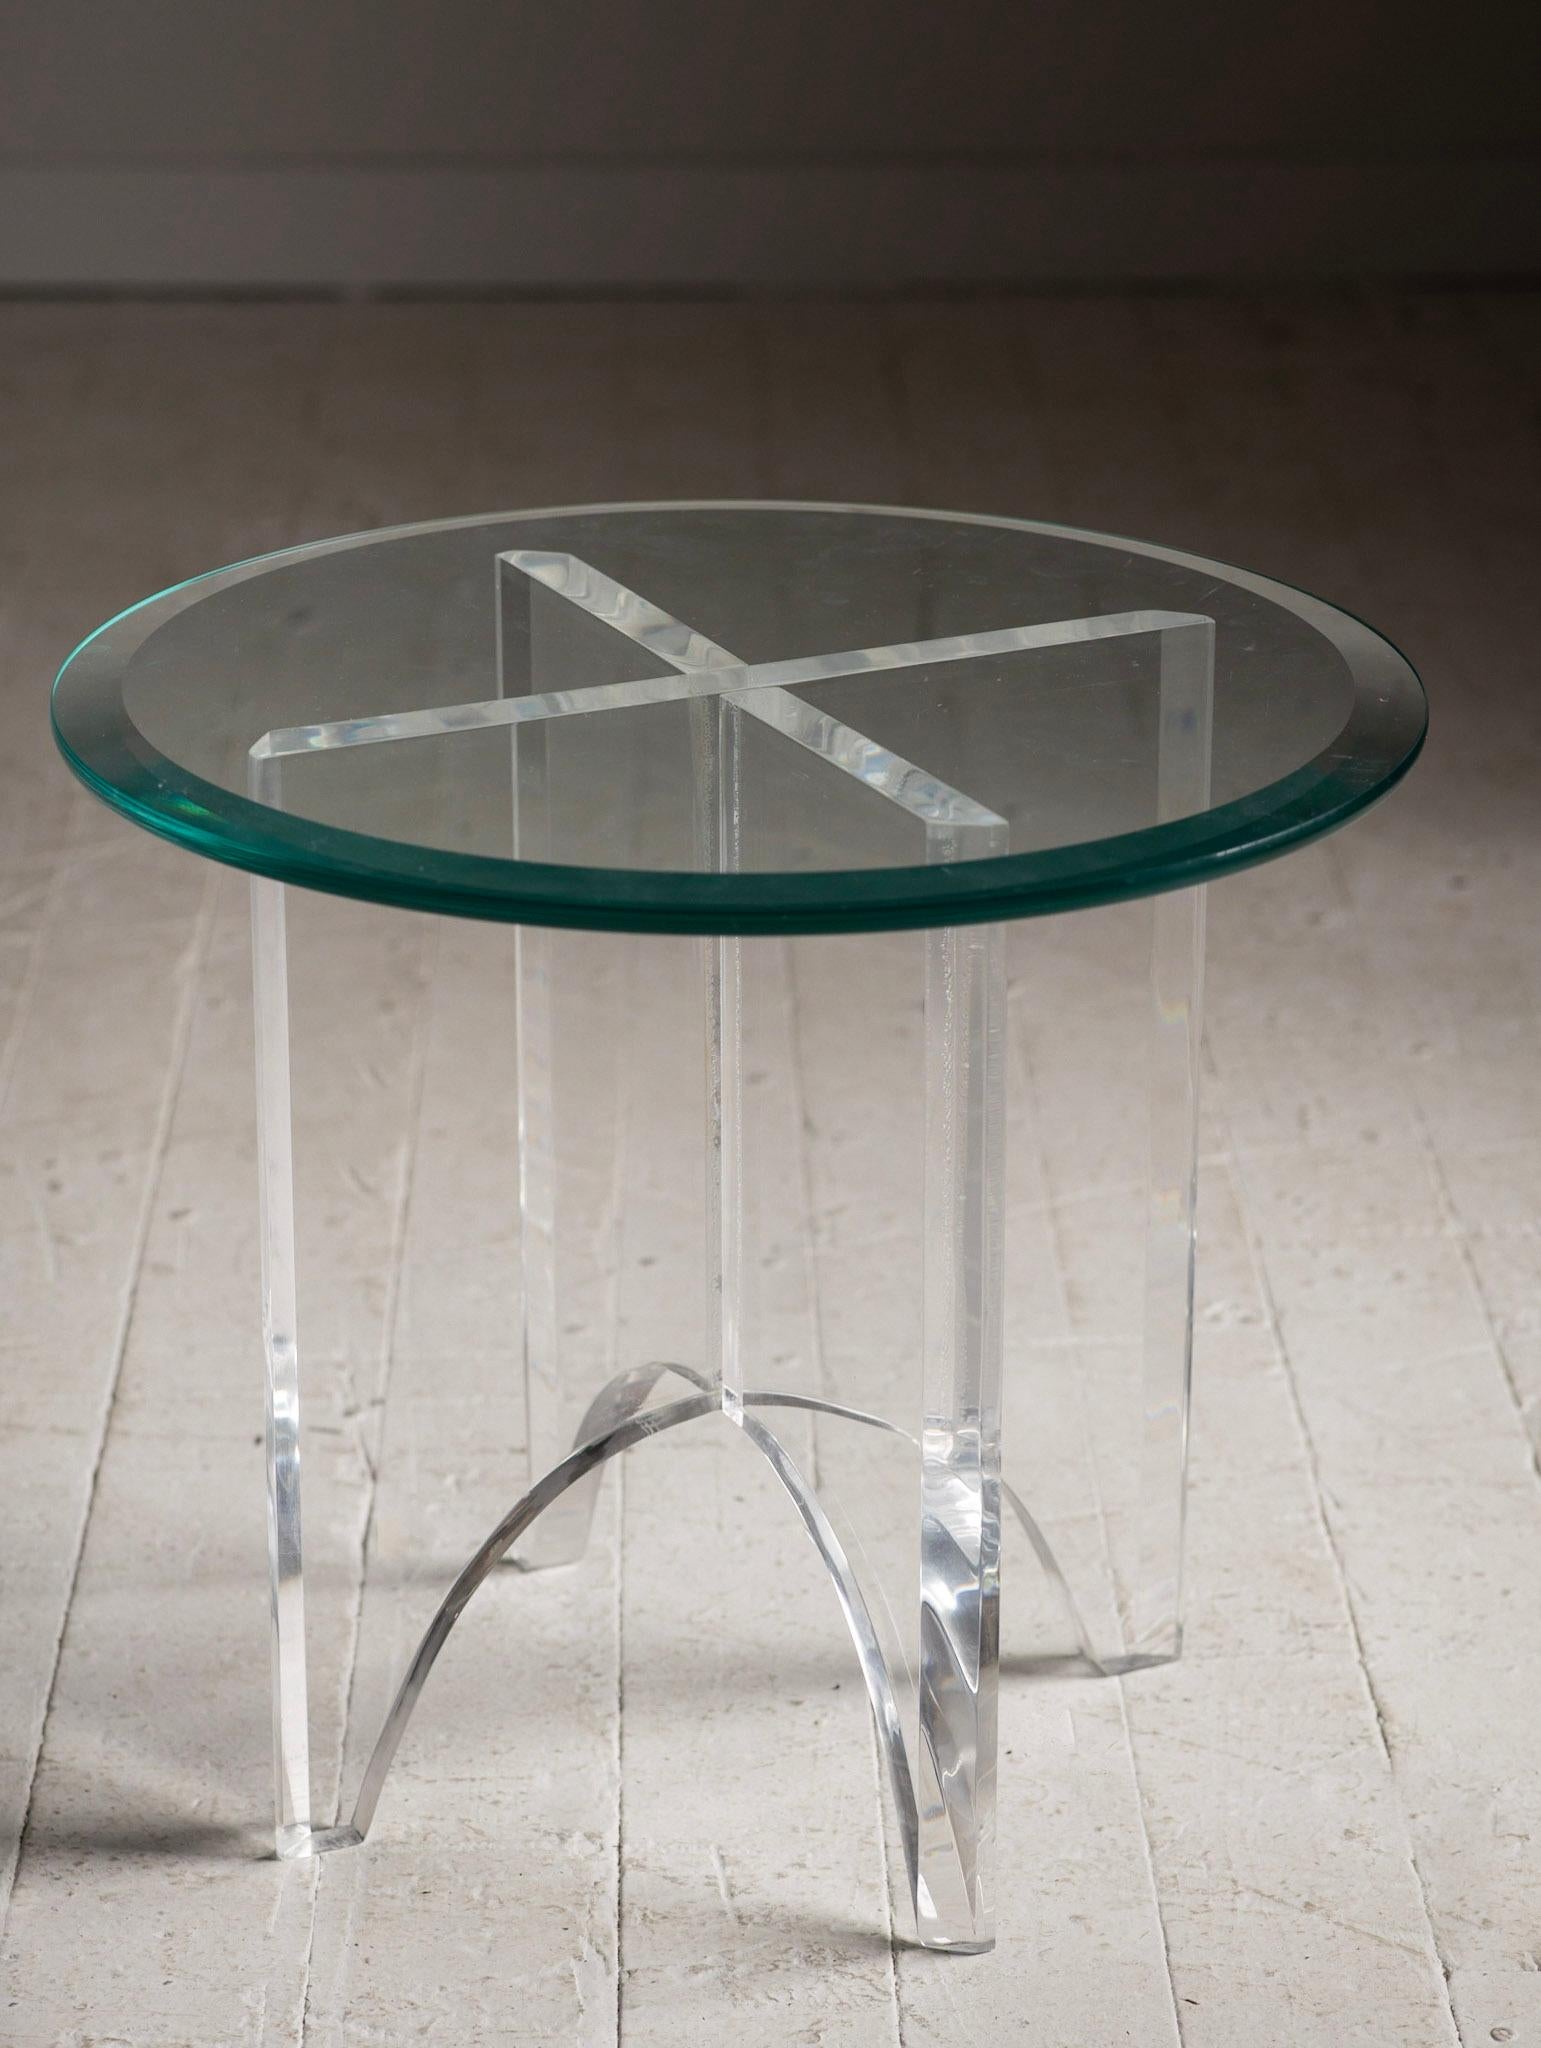 Sleek little lucite table with beveled glass top. Thick lucite 